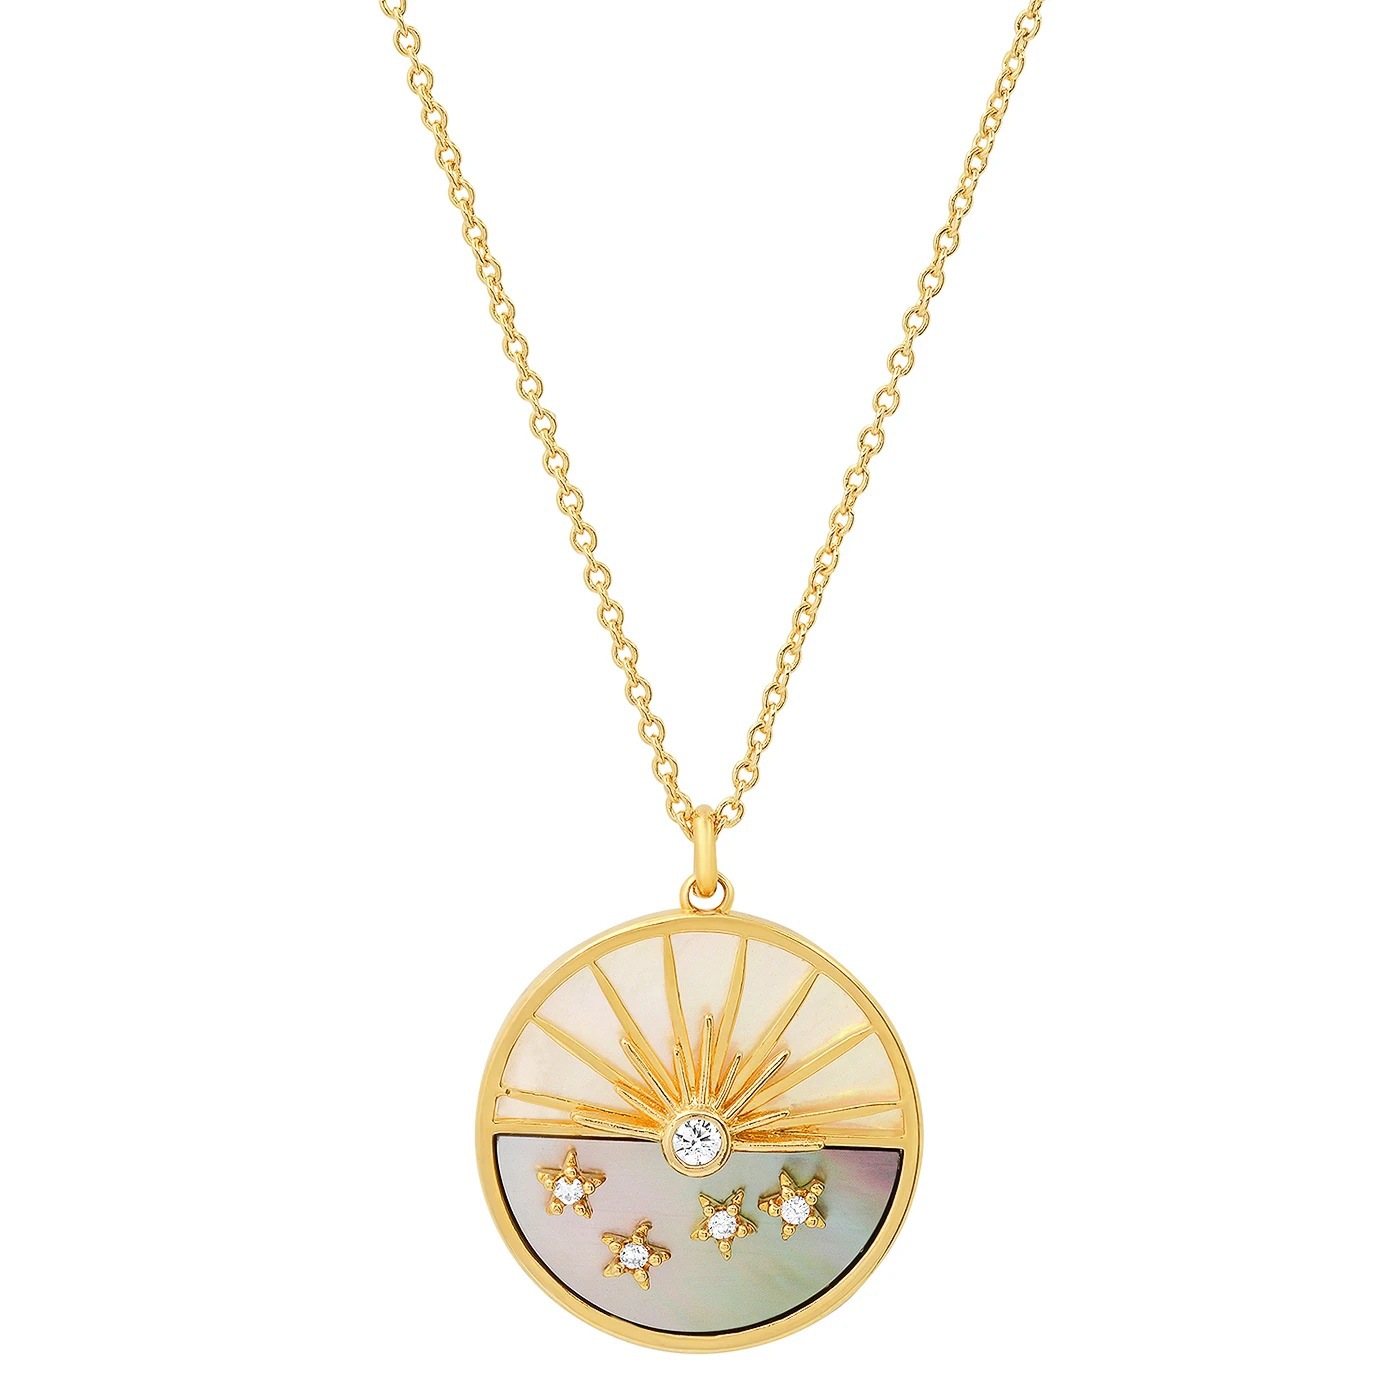 1:Round Necklace of sun rays